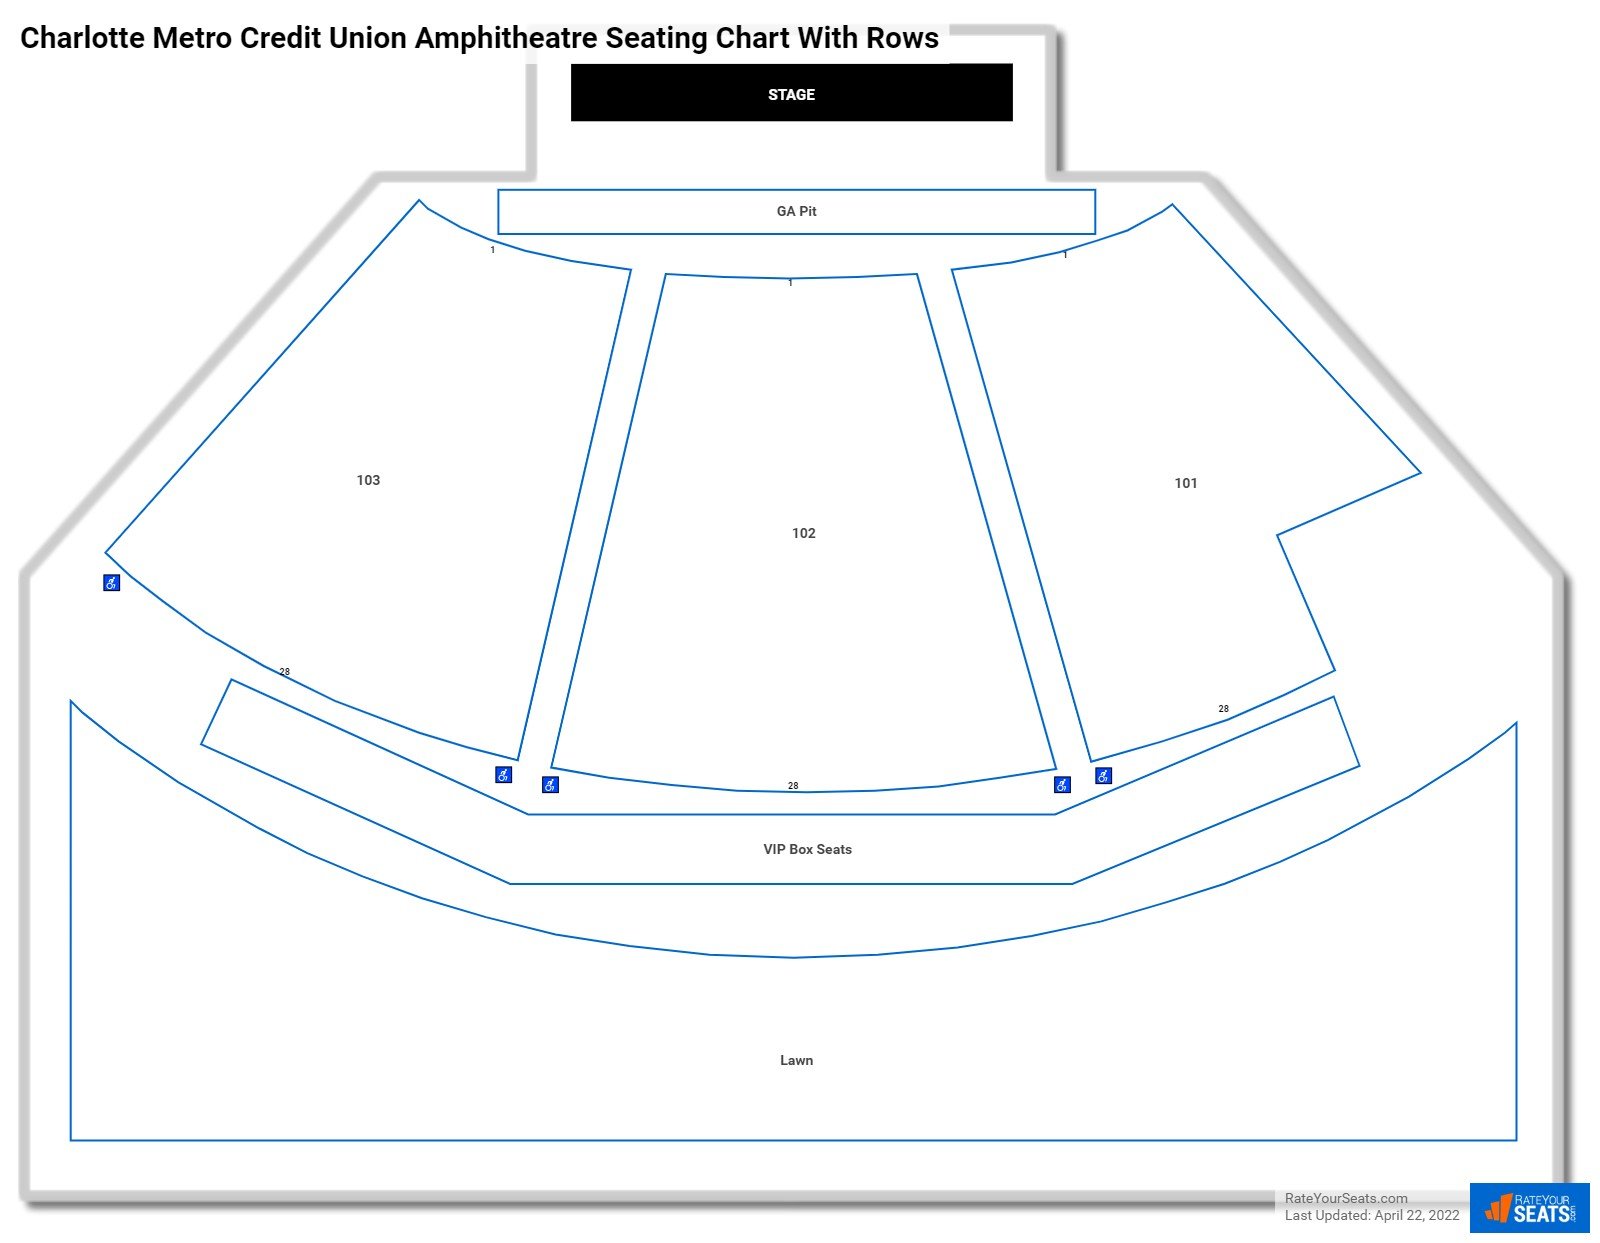 Charlotte Metro Credit Union Amphitheatre seating chart with row numbers